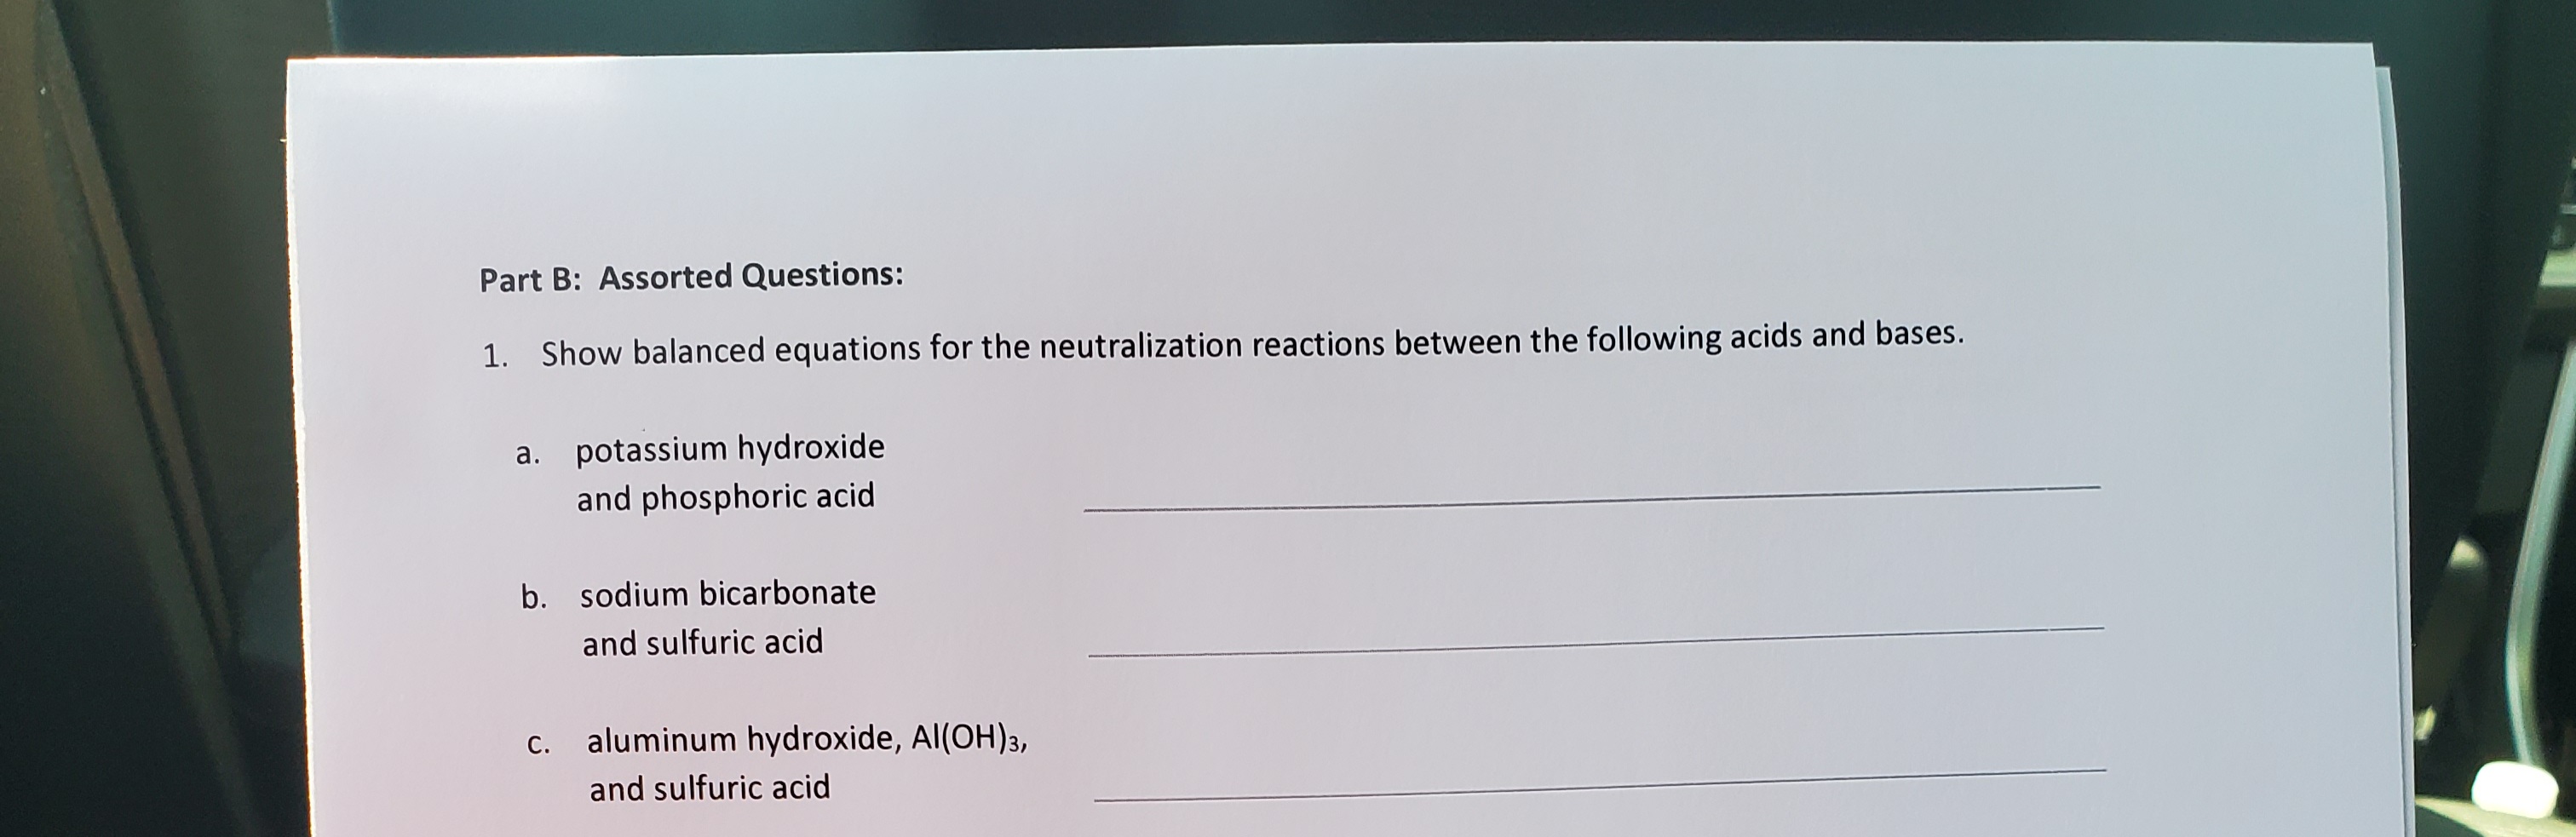 Part B: Assorted Questions:
1. Show balanced equations for the neutralization reactions between the following acids and bases.
a. potassium hydroxide
and phosphoric acid
b. sodium bicarbonate
and sulfuric acid
